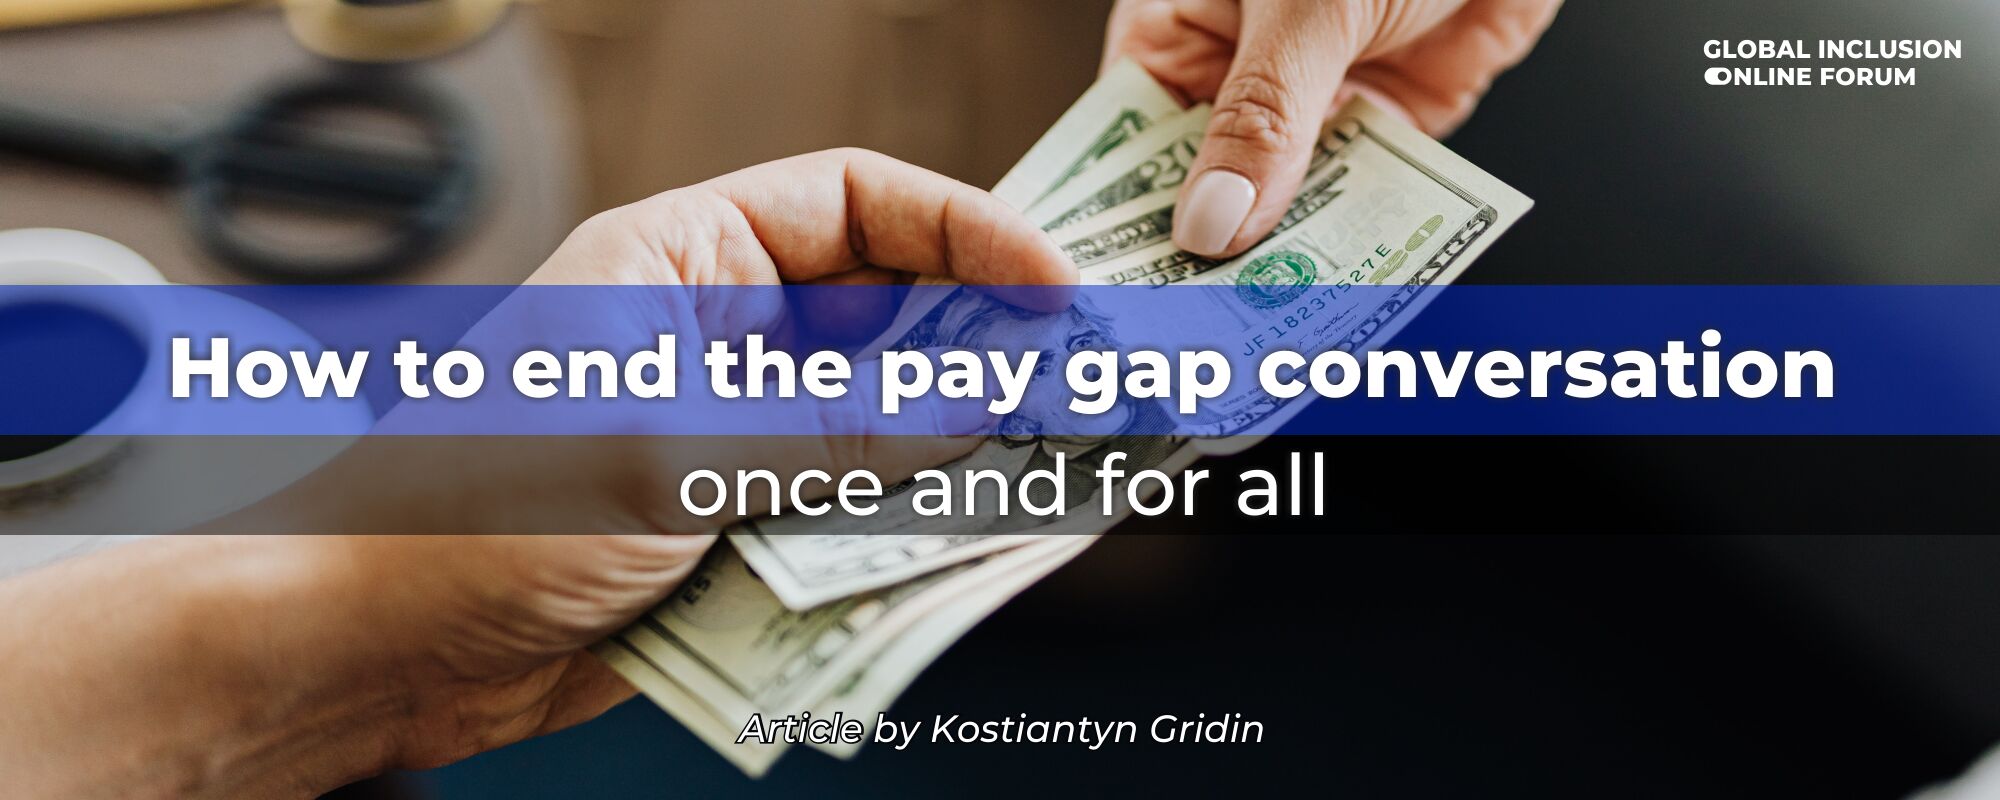 KOSTIANTYN GRIDIN - HOW TO END THE PAY GAP COVERSATION ONCE AND FOR ALL